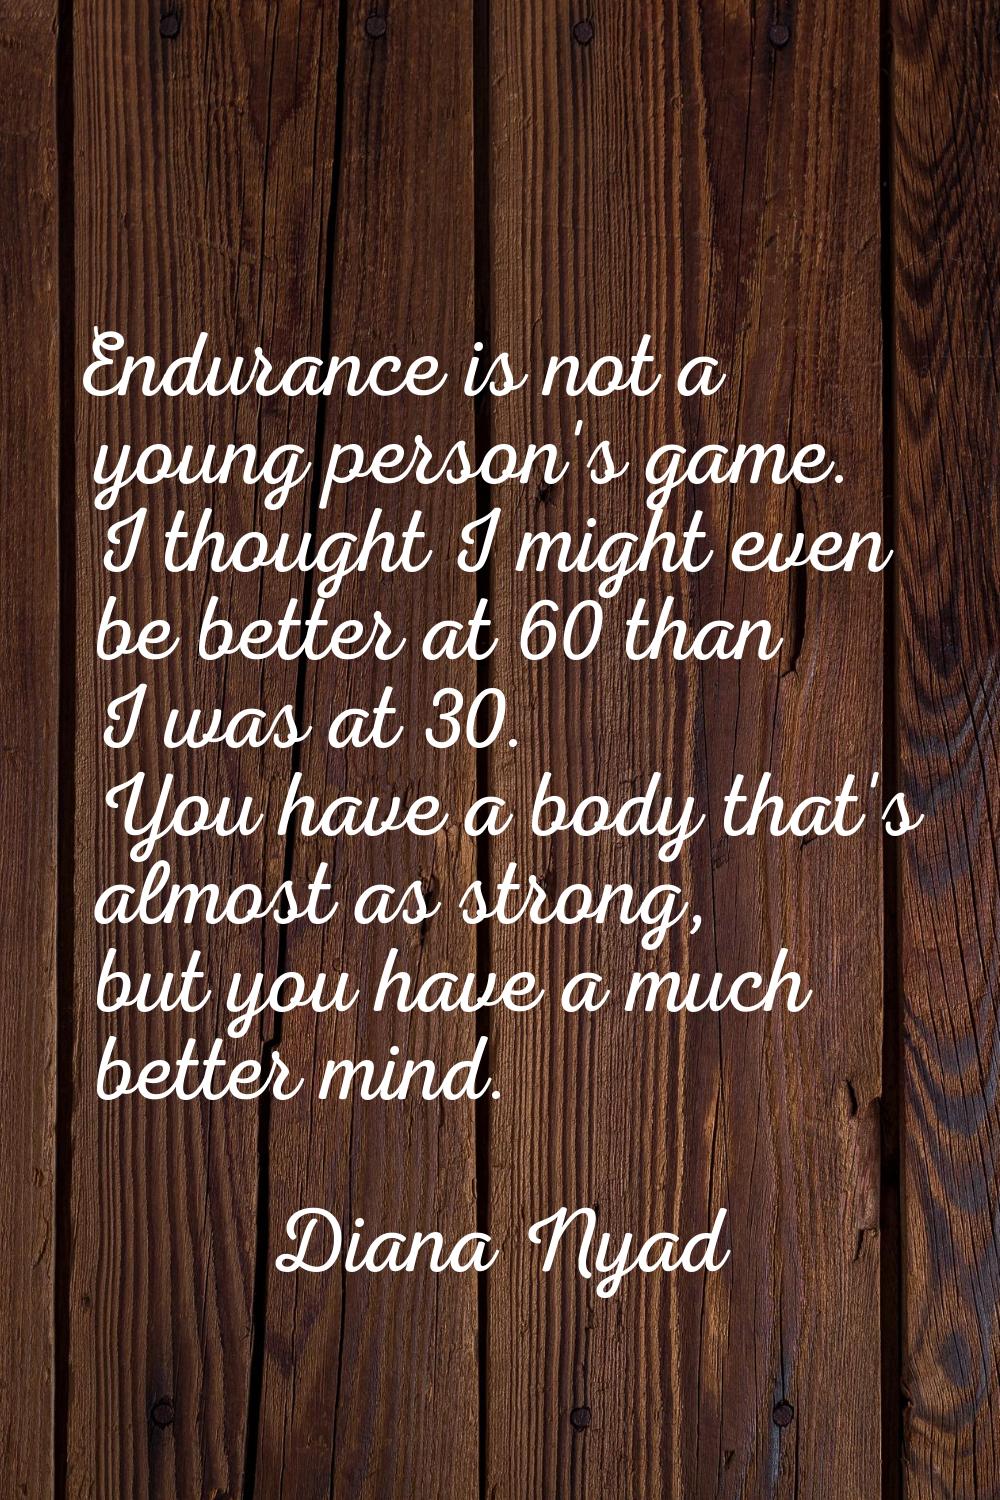 Endurance is not a young person's game. I thought I might even be better at 60 than I was at 30. Yo